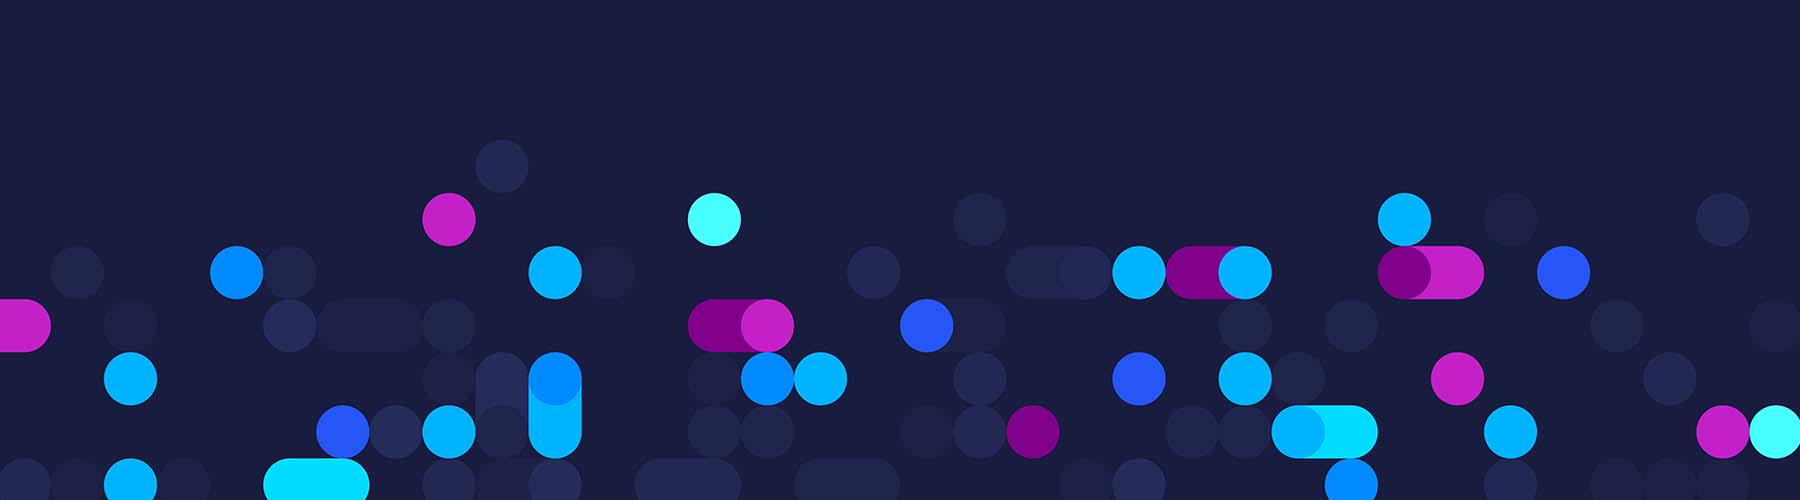 An abstract illustration of multicolor pixels. They are blue and purple and are laid out on a dark blue background.  